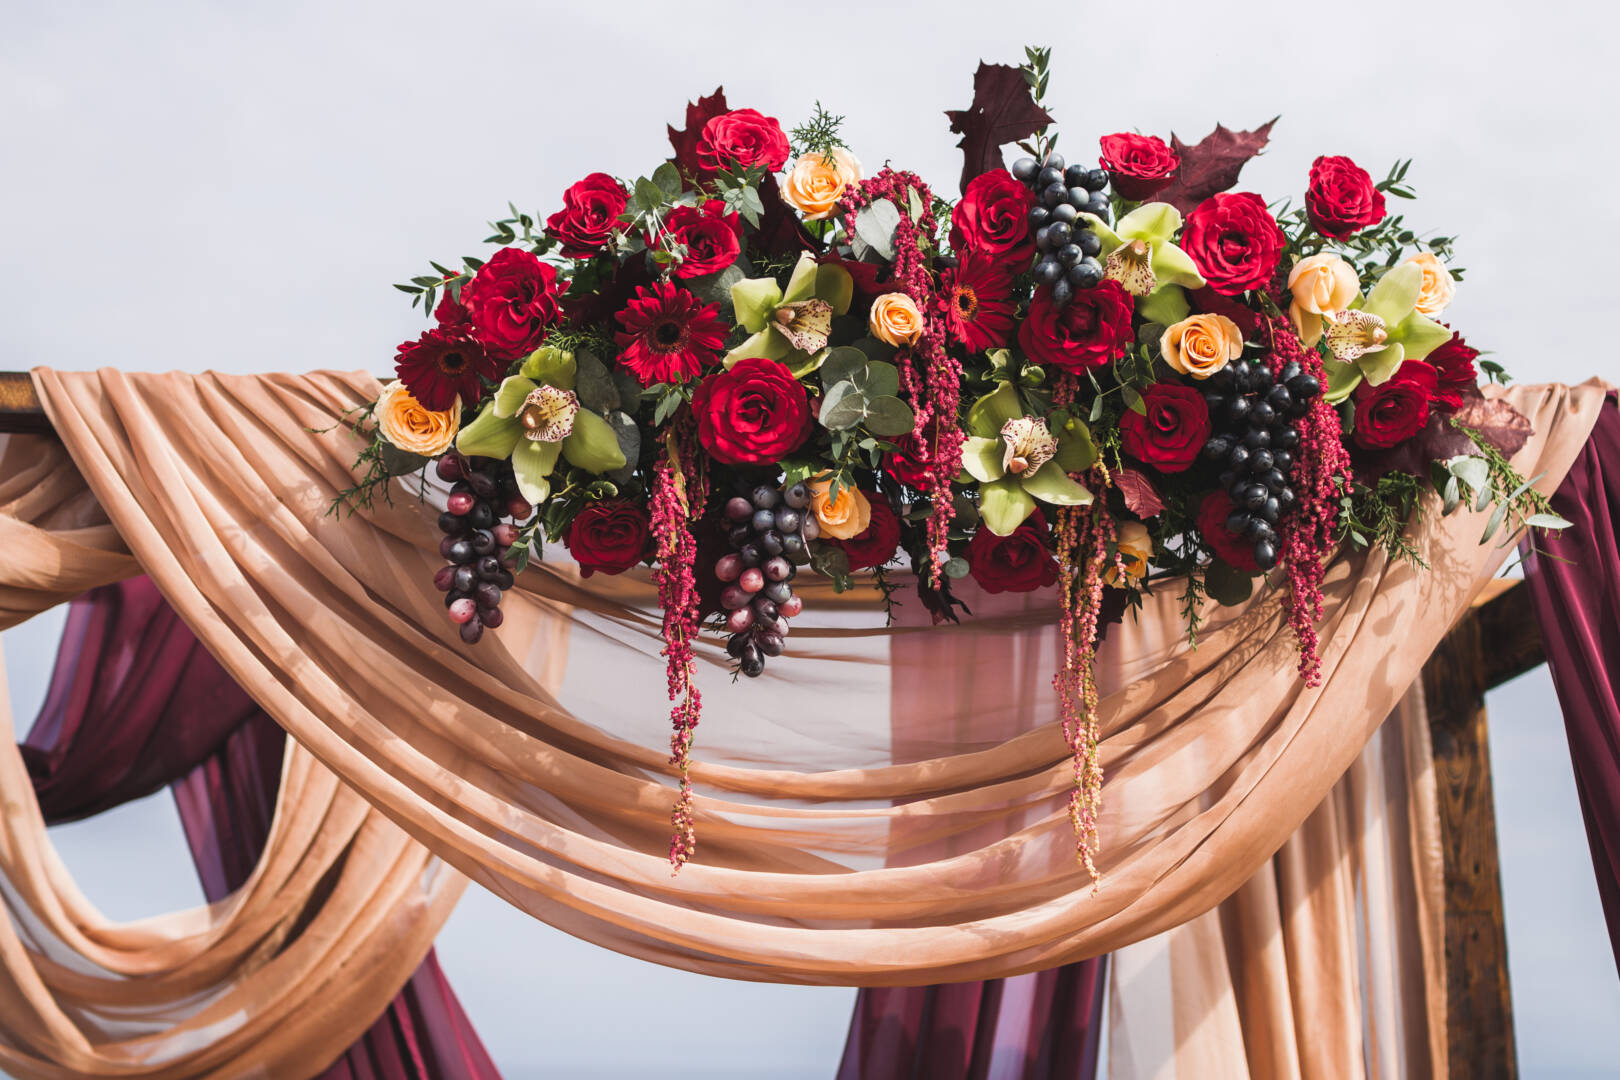 Wedding ceremony in Boho style, decorated with red roses, yellow